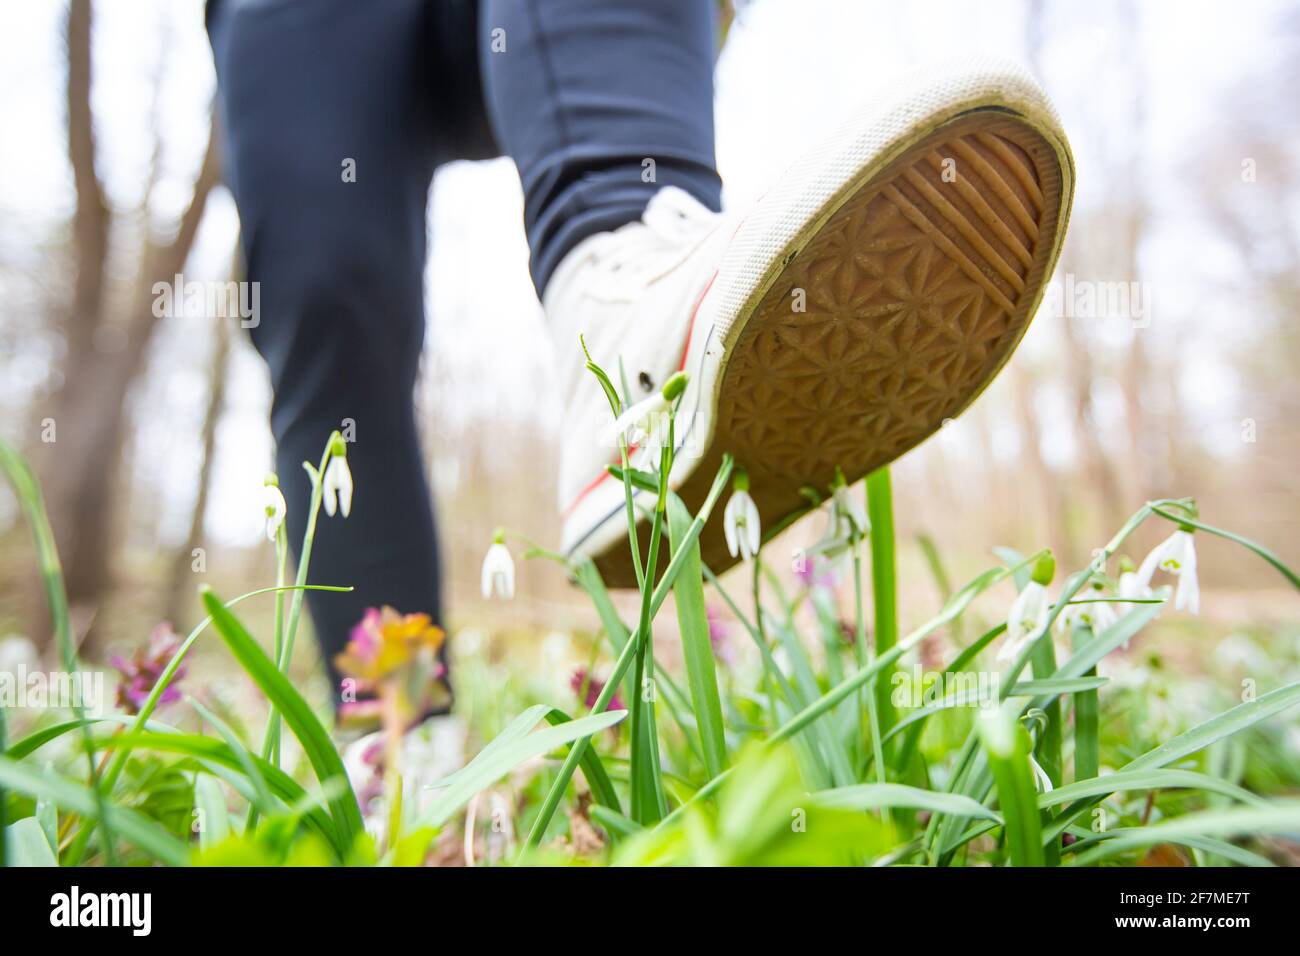 The foot of a woman shoes steps on a rare flowers in national park, botanical garden, damage to nature, environmental concept Stock Photo